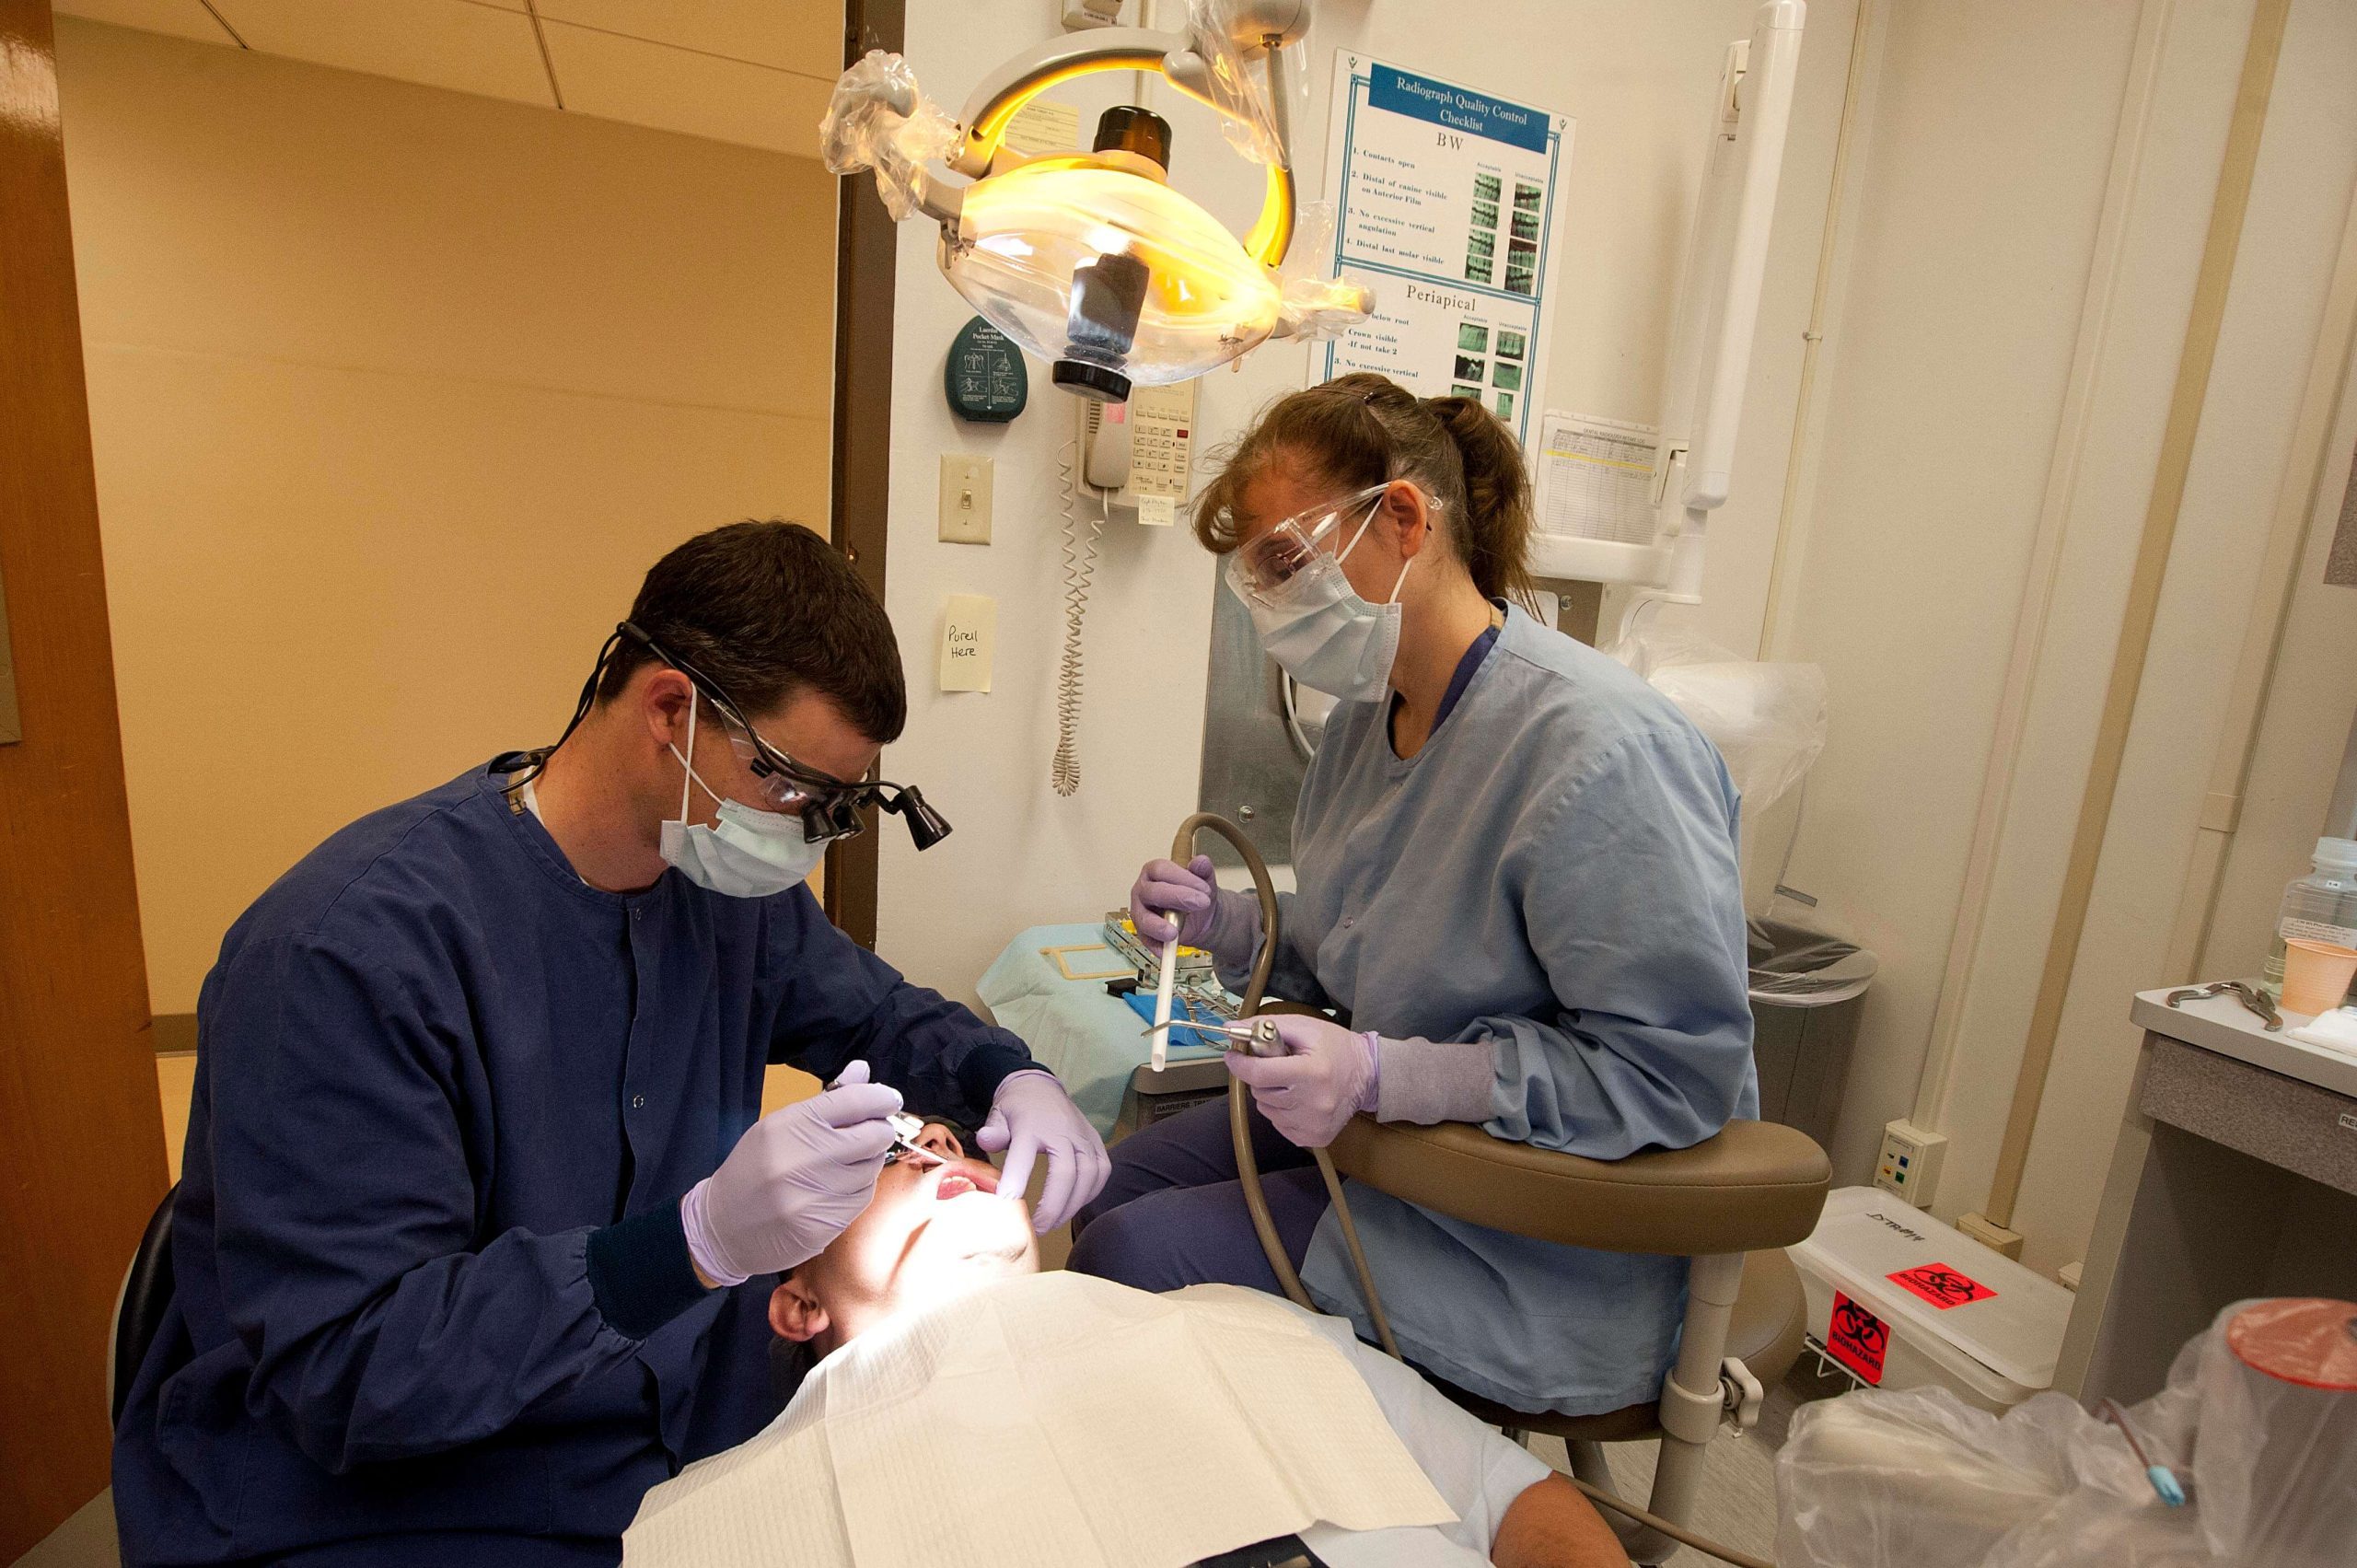 What Should I Expect When Getting a Root Canal?